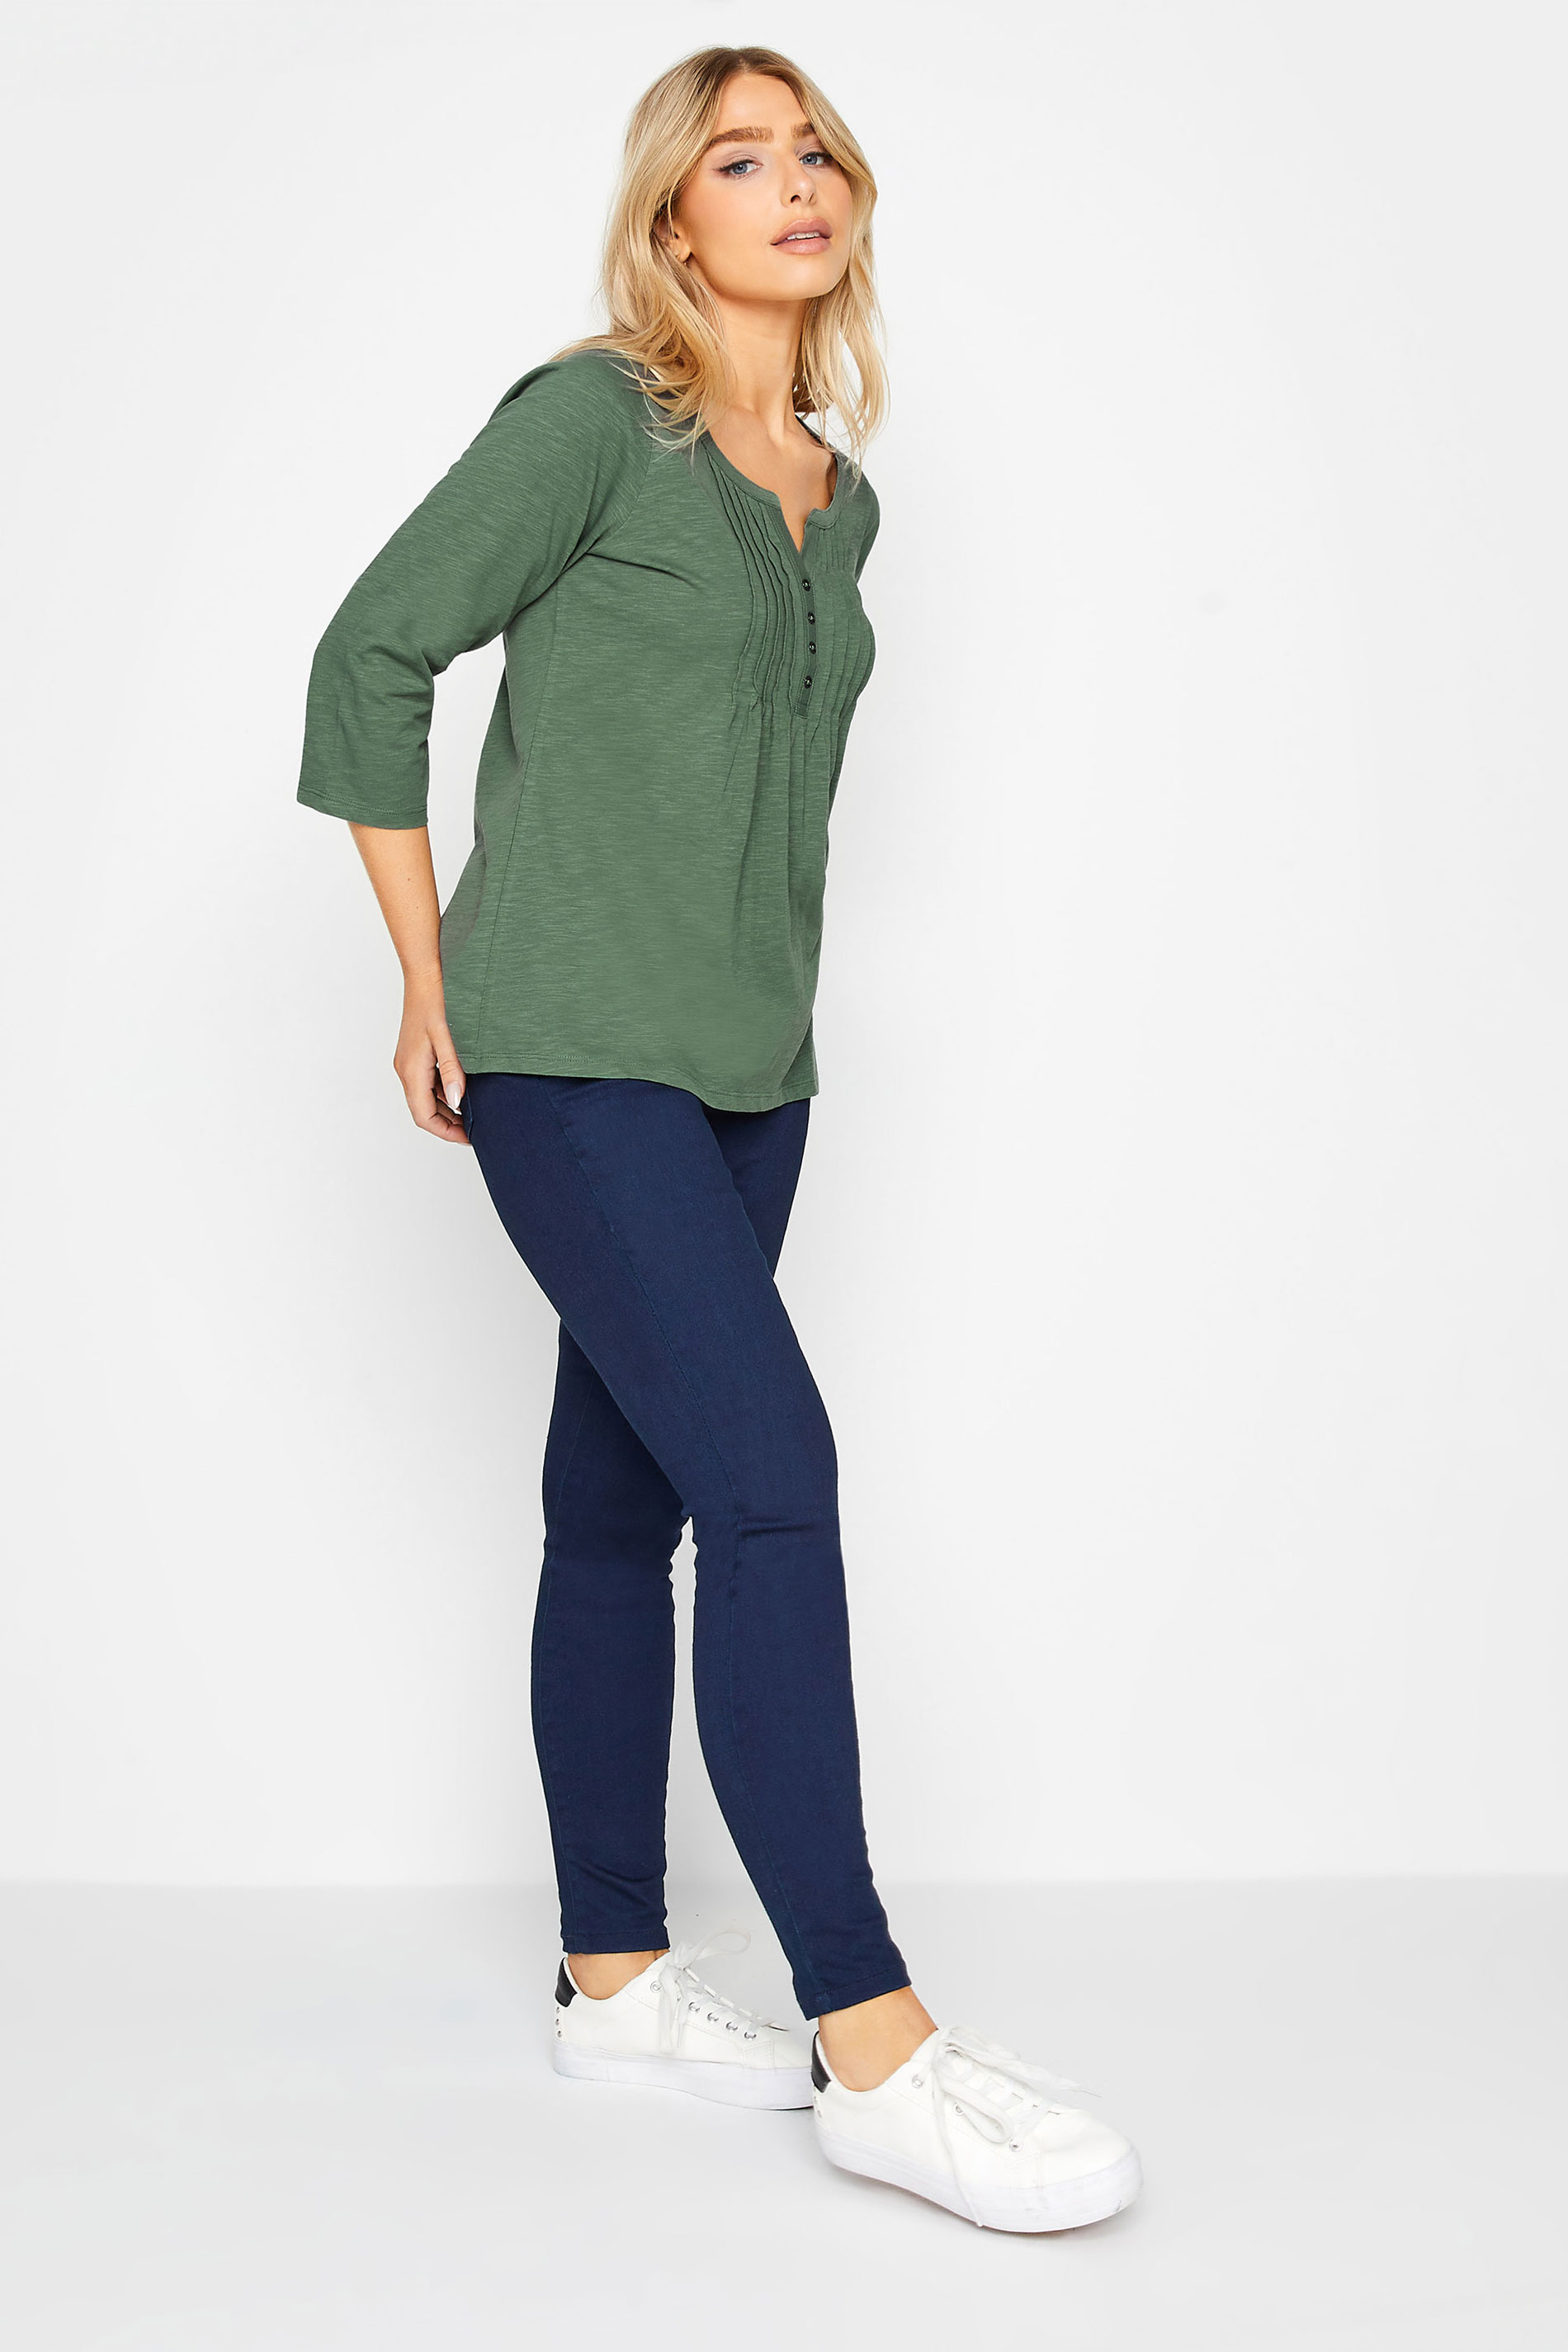 M&Co Sage Green Cotton Henley Top | M&Co 2